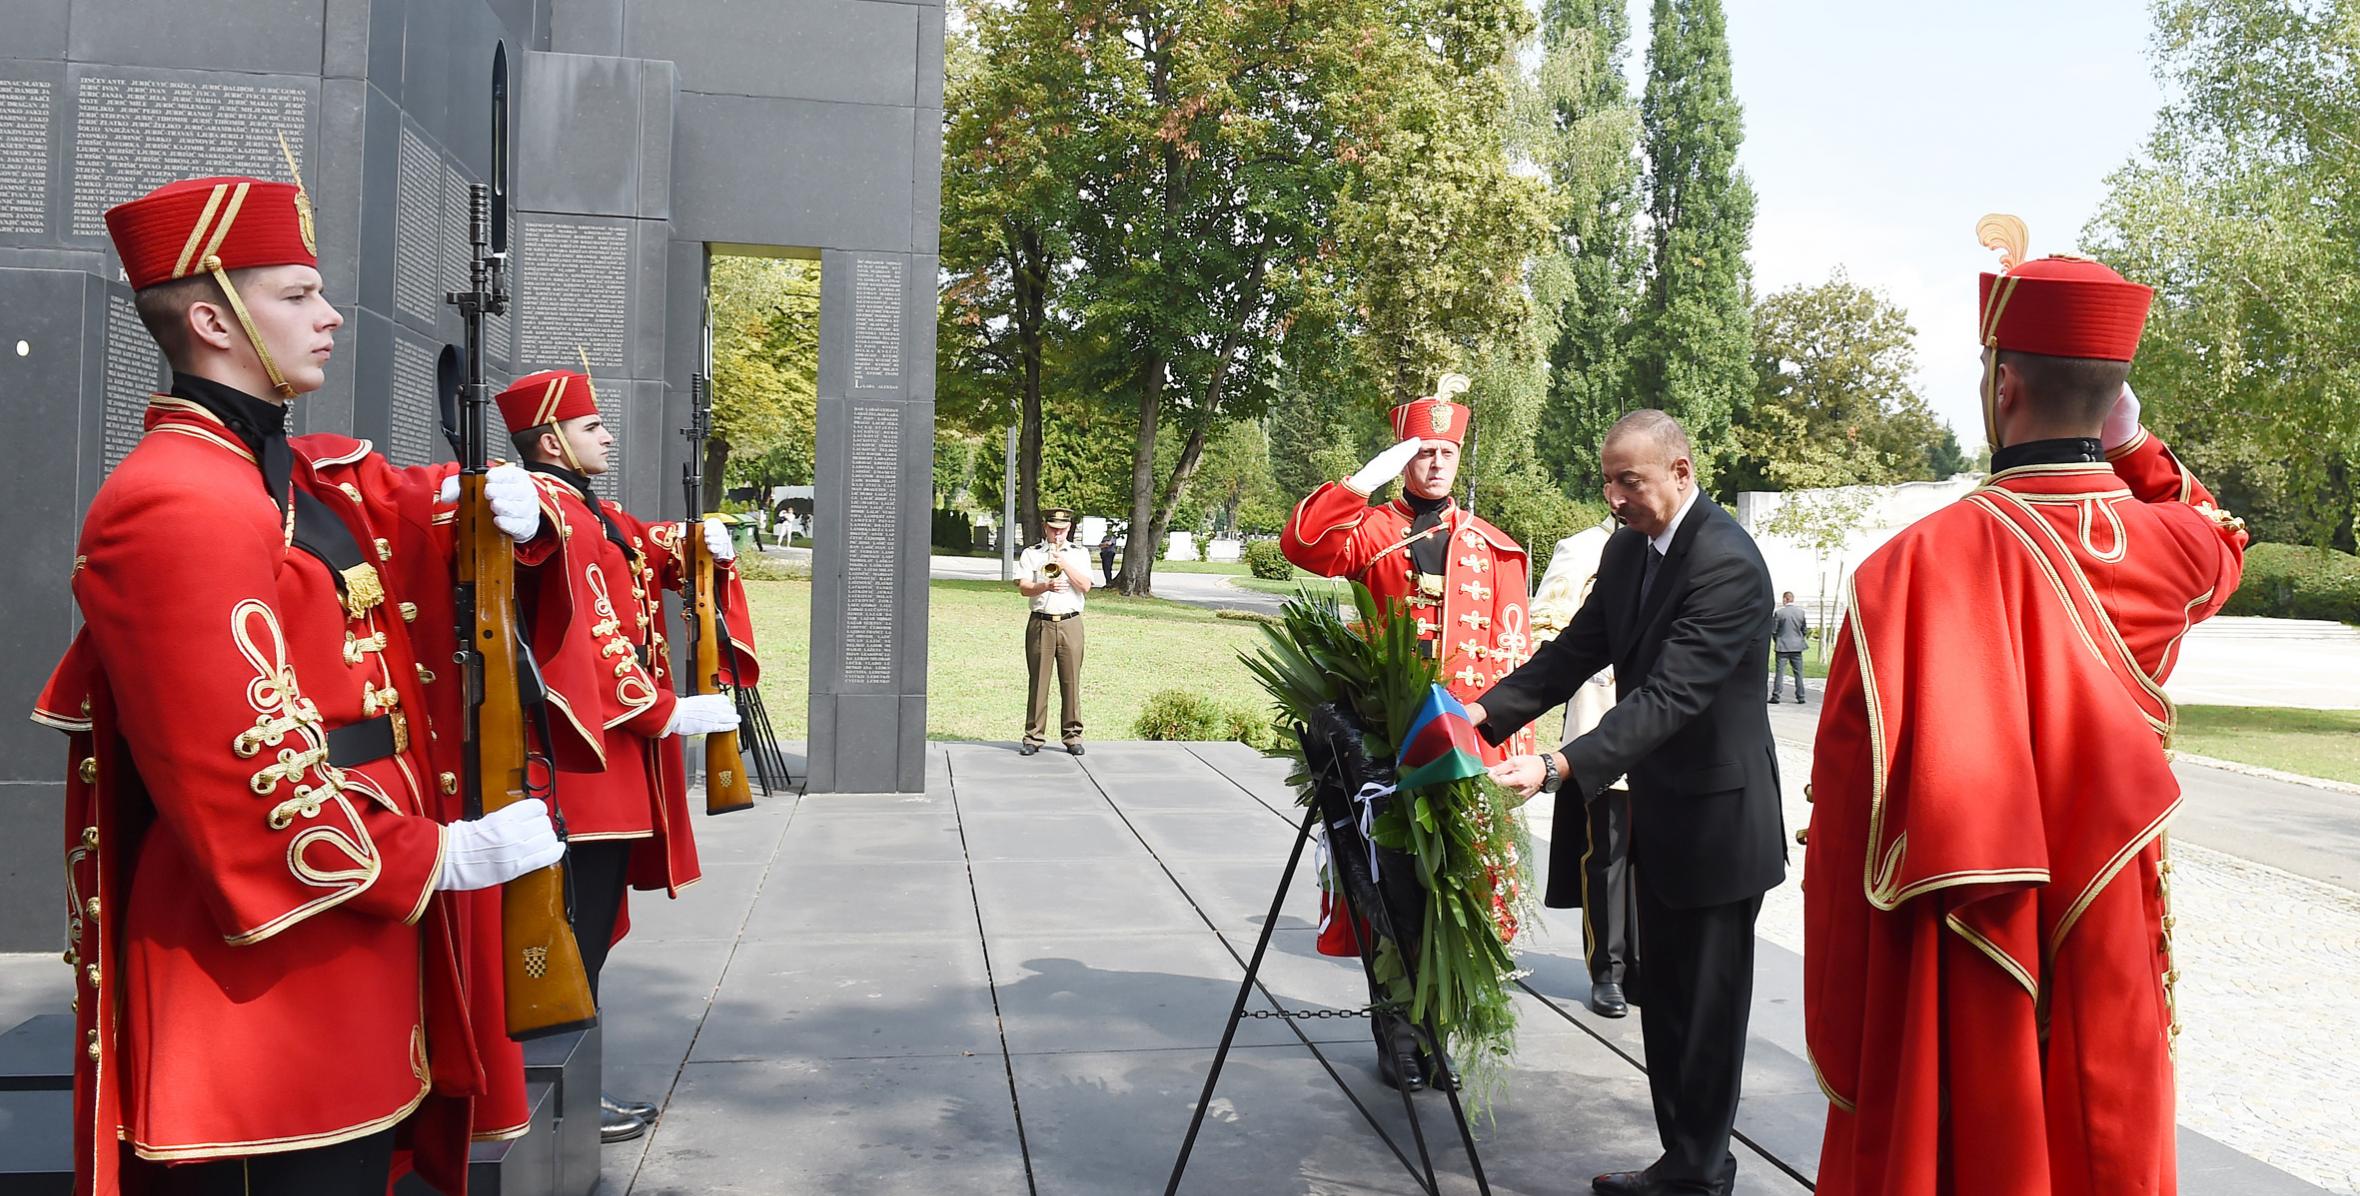 Ilham Aliyev visited “Voice of Croatian Victims – Wall of Pain” monument in Zagreb